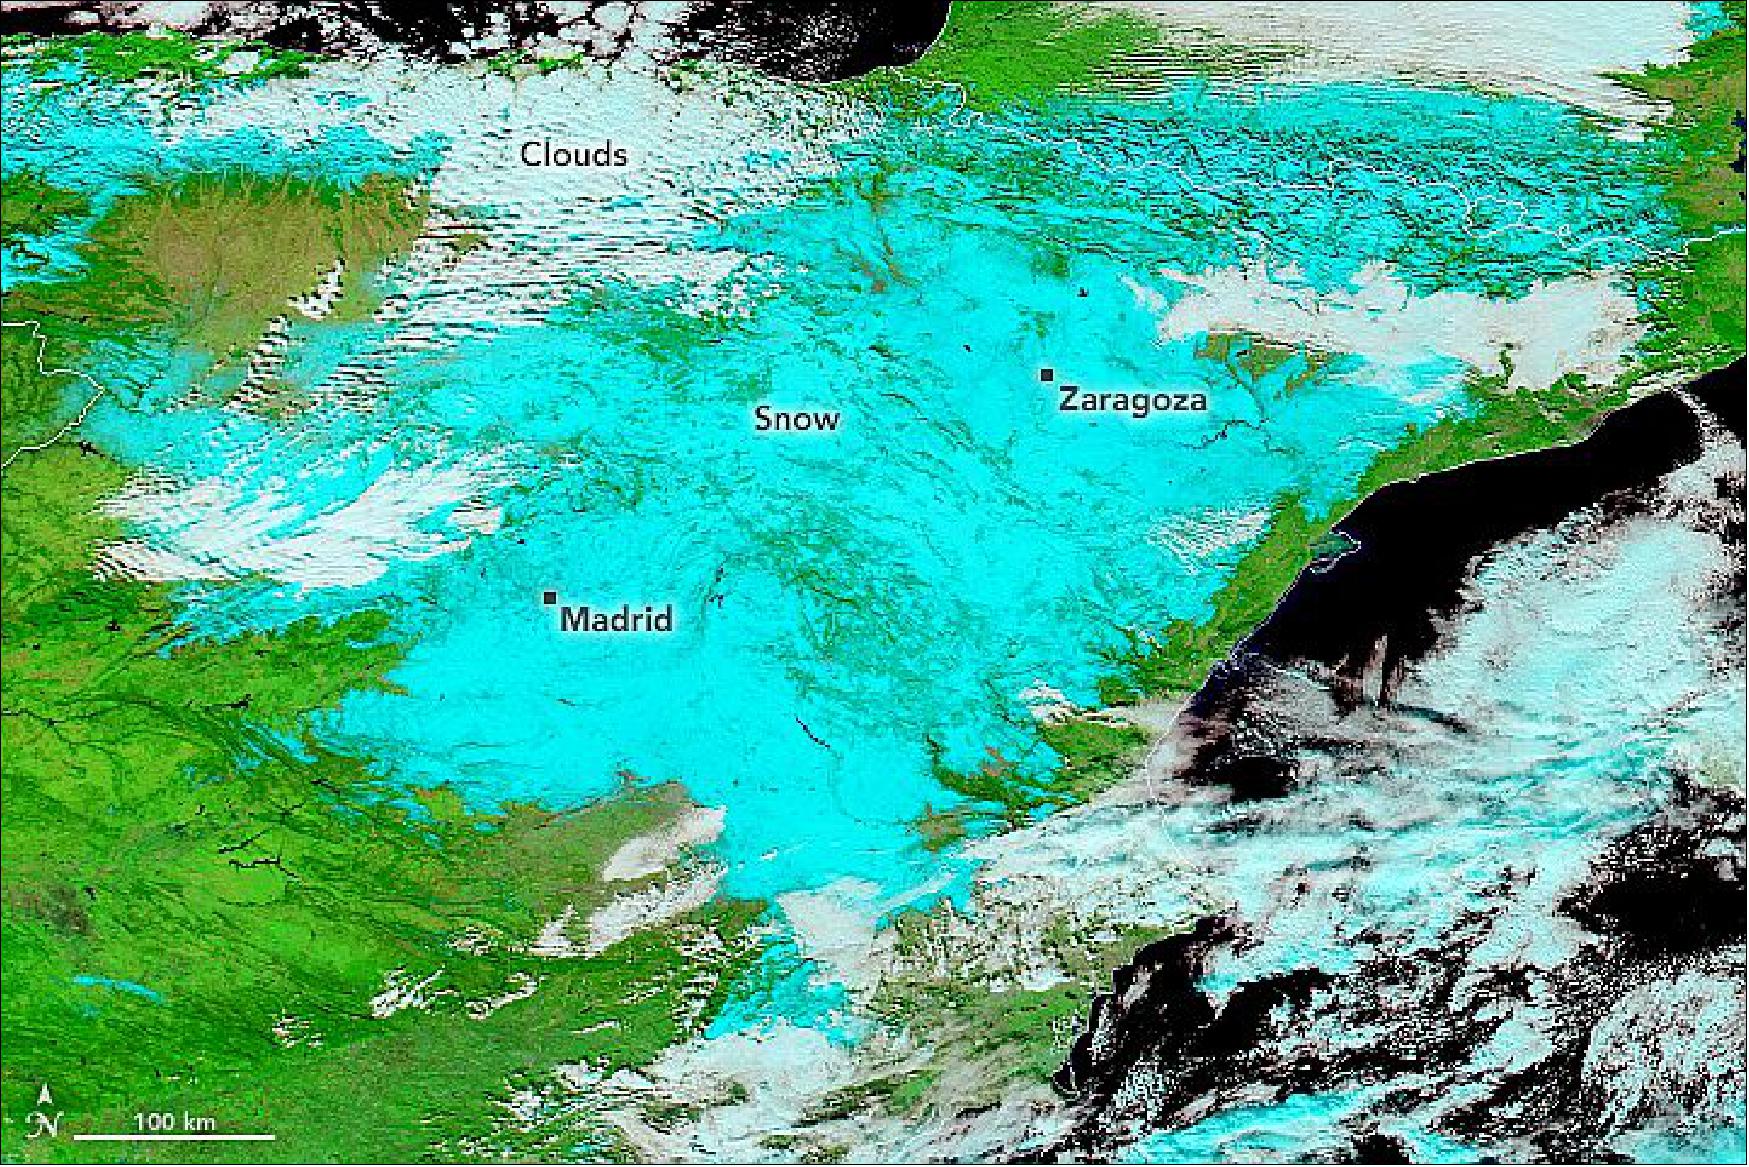 Figure 49: This MODIS image combines visible light, near-infrared, and shortwave infrared (MODIS bands 7-2-1) to distinguish clouds (white) from snow, ice, and high-altitude icy clouds (all shades of teal), image credit: NASA Earth Observatory